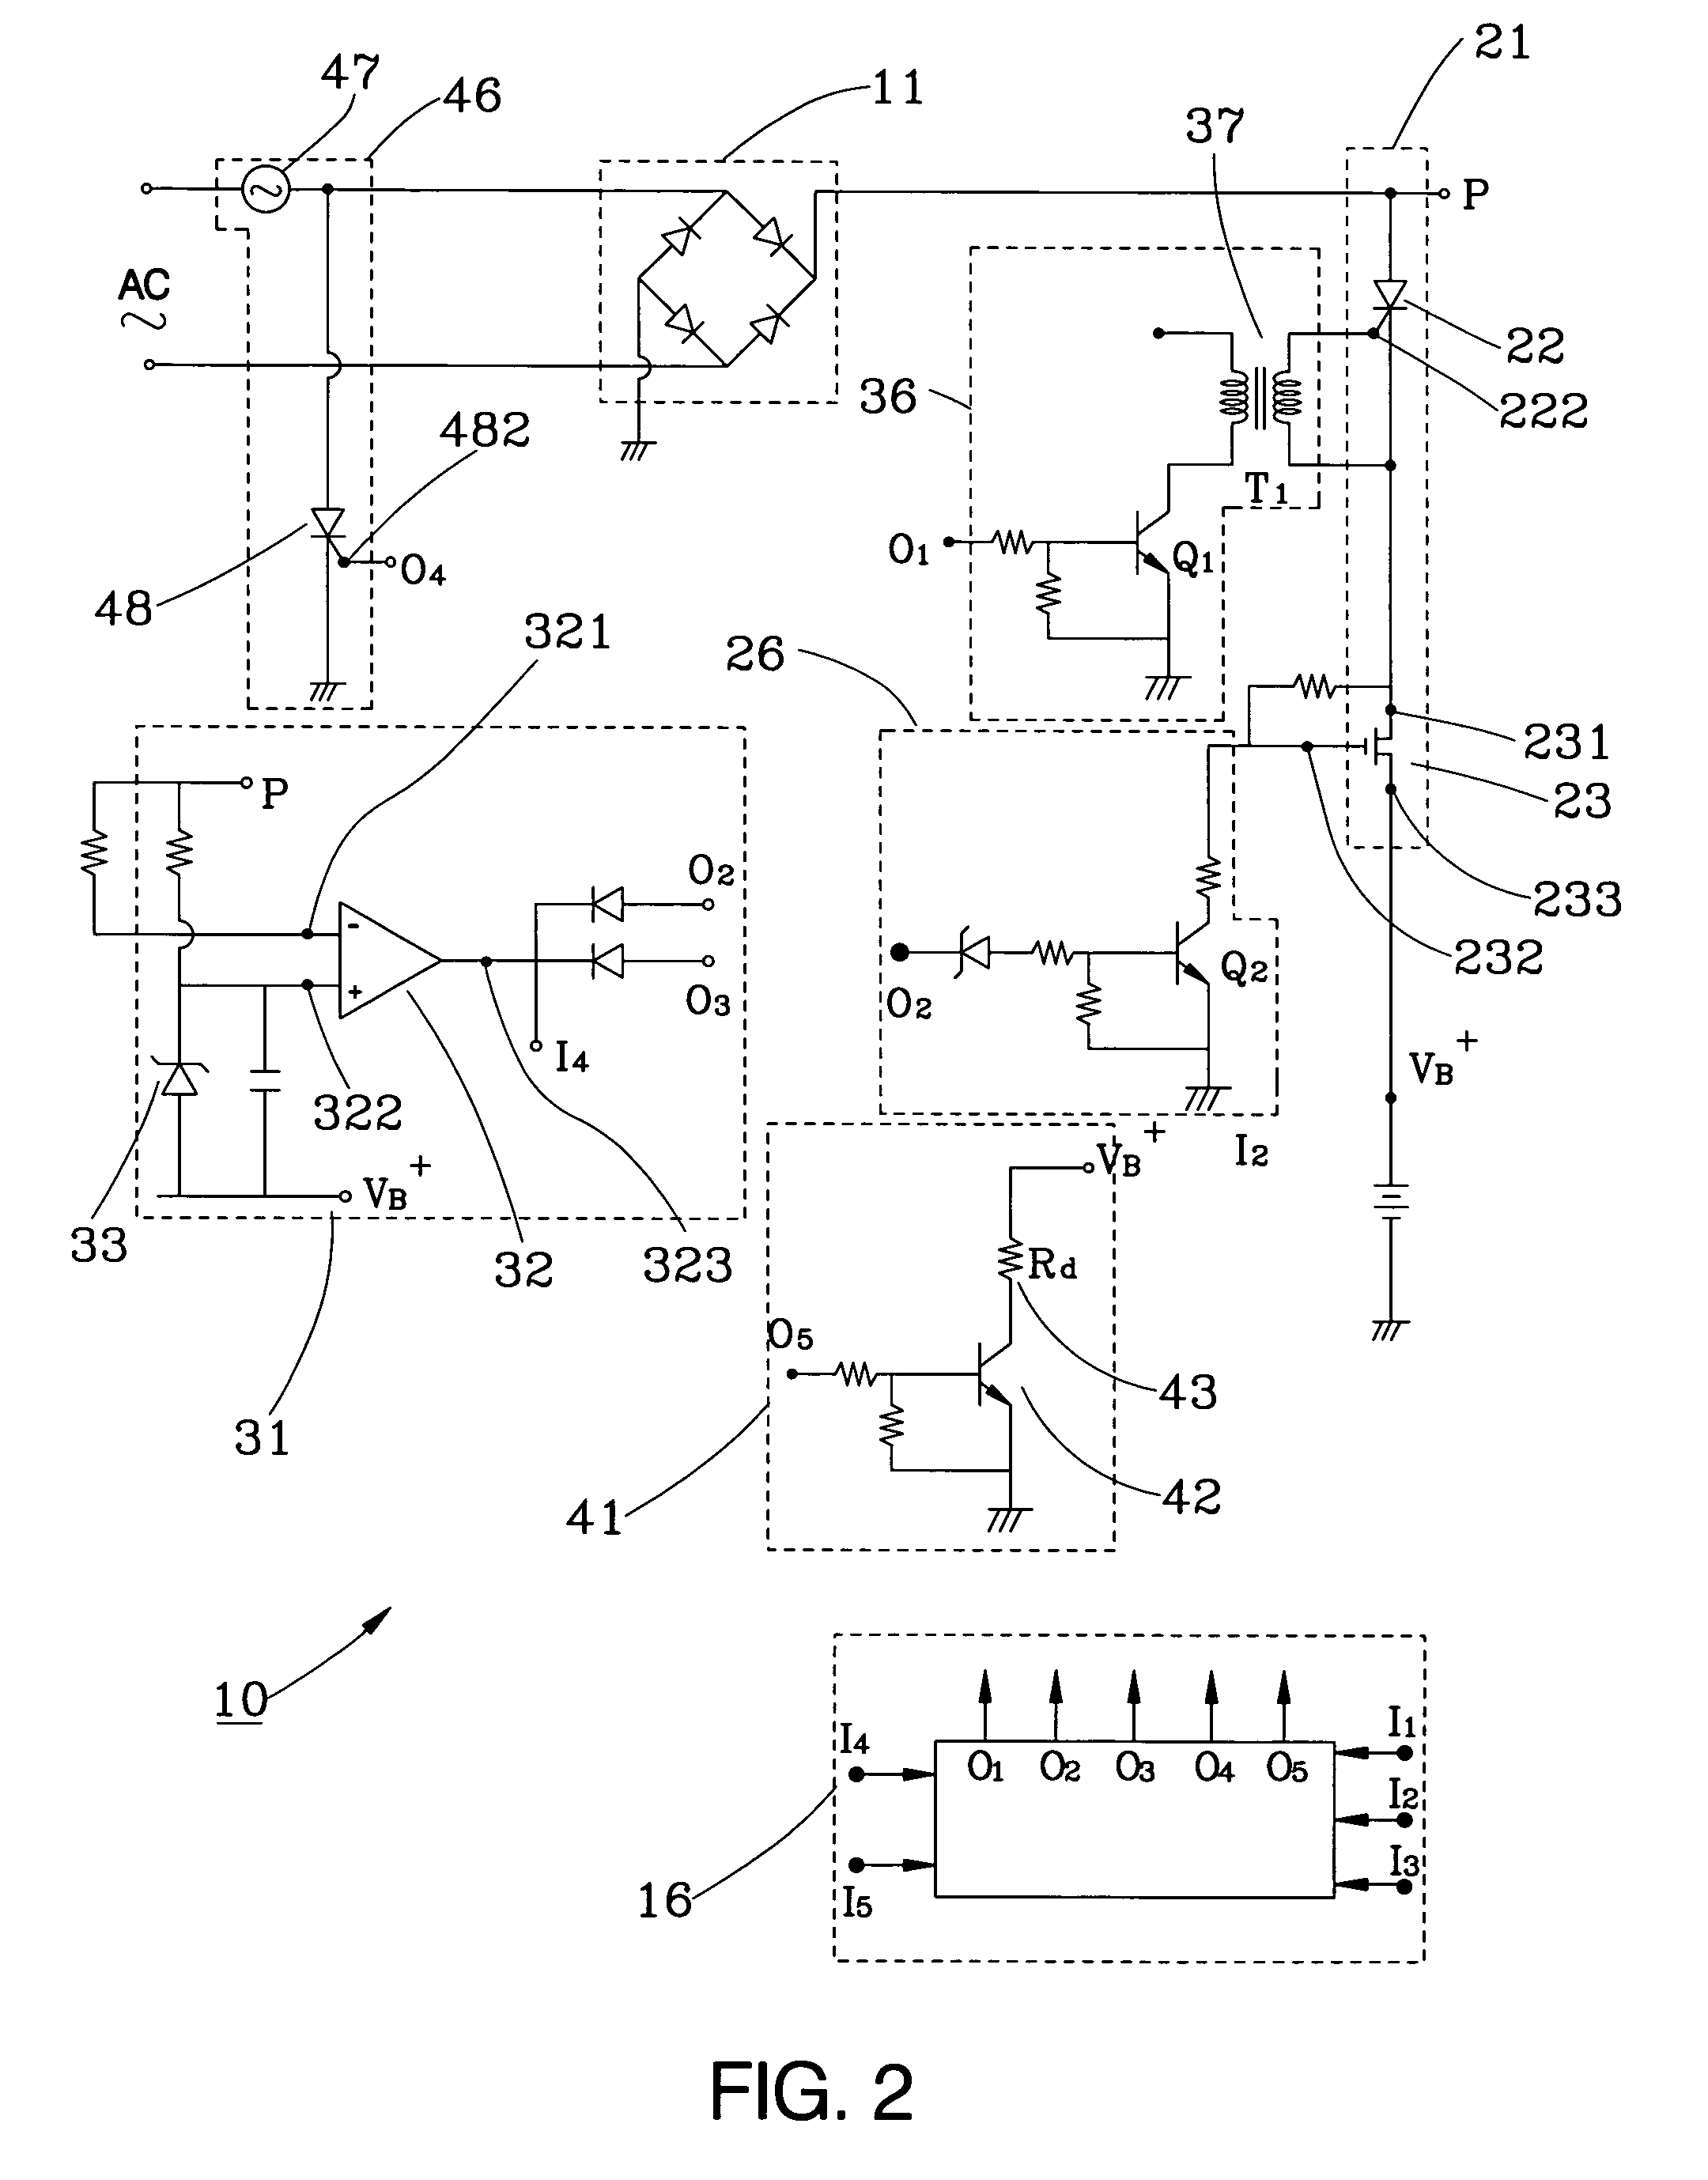 Battery charging and/or DC power supply circuitry